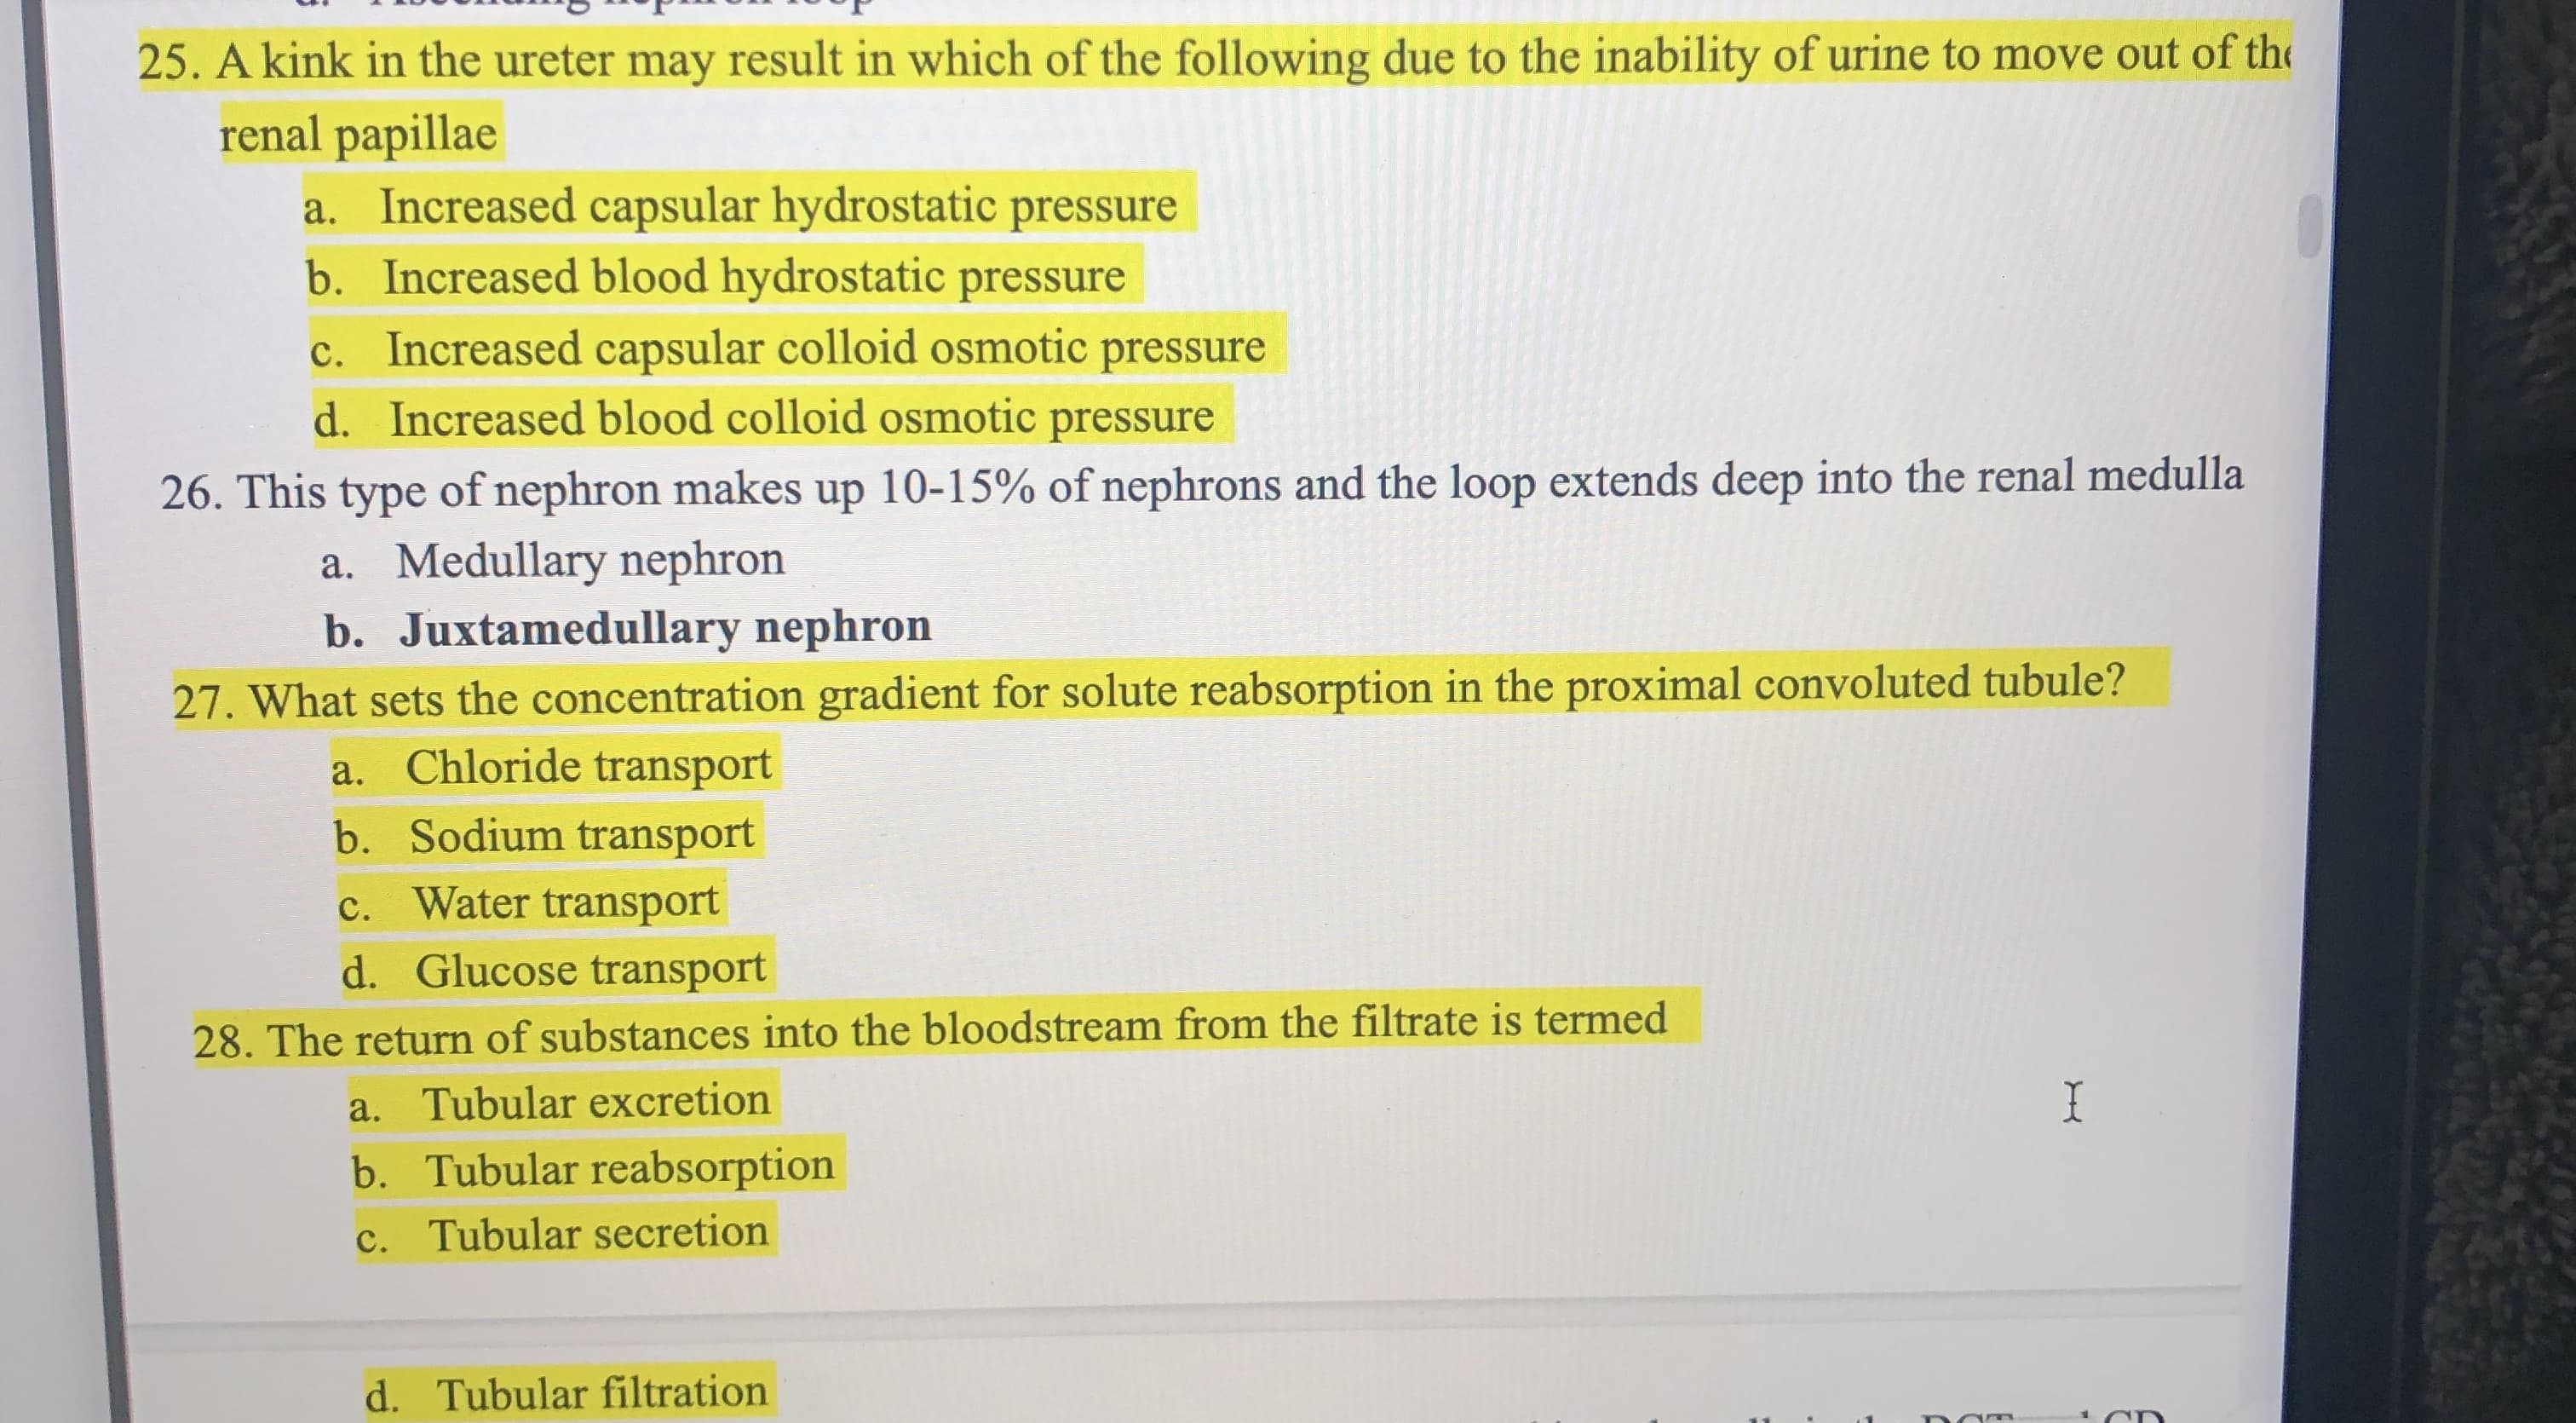 25. A kink in the ureter may result in which of the following due to the inability of urine to move out of the
renal papillae
a. Increased capsular hydrostatic pressure
b. Increased blood hydrostatic pressure
Increased capsular colloid osmotic pressure
d. Increased blood colloid osmotic pressure
